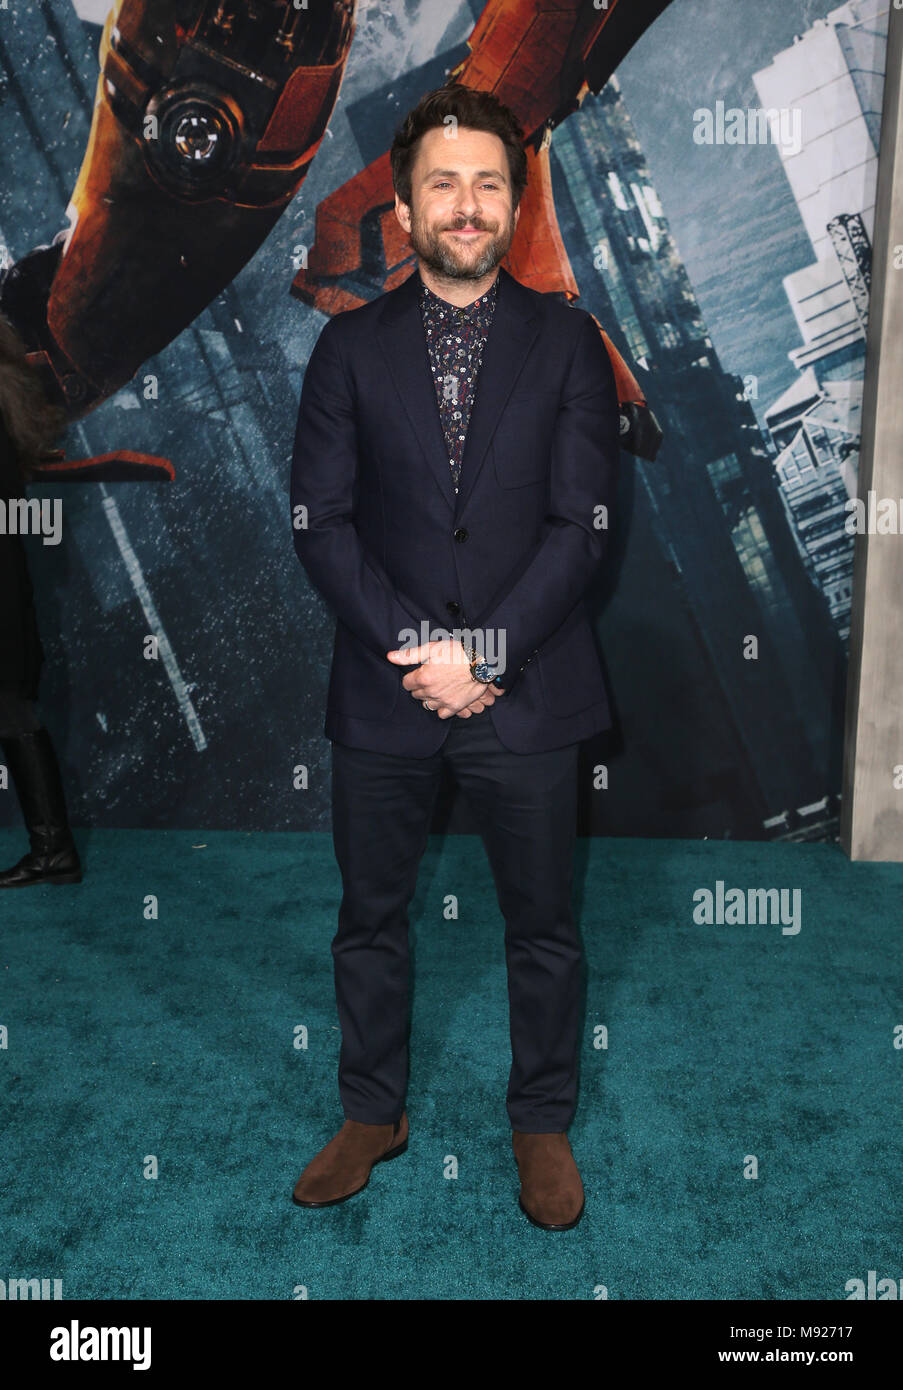 Cast member Charlie Day attends the premiere of the sci-fi motion picture  Pacific Rim Uprising at the TCL Chinese Theatre in the Hollywood section  of Los Angeles on March 21, 2018. Storyline